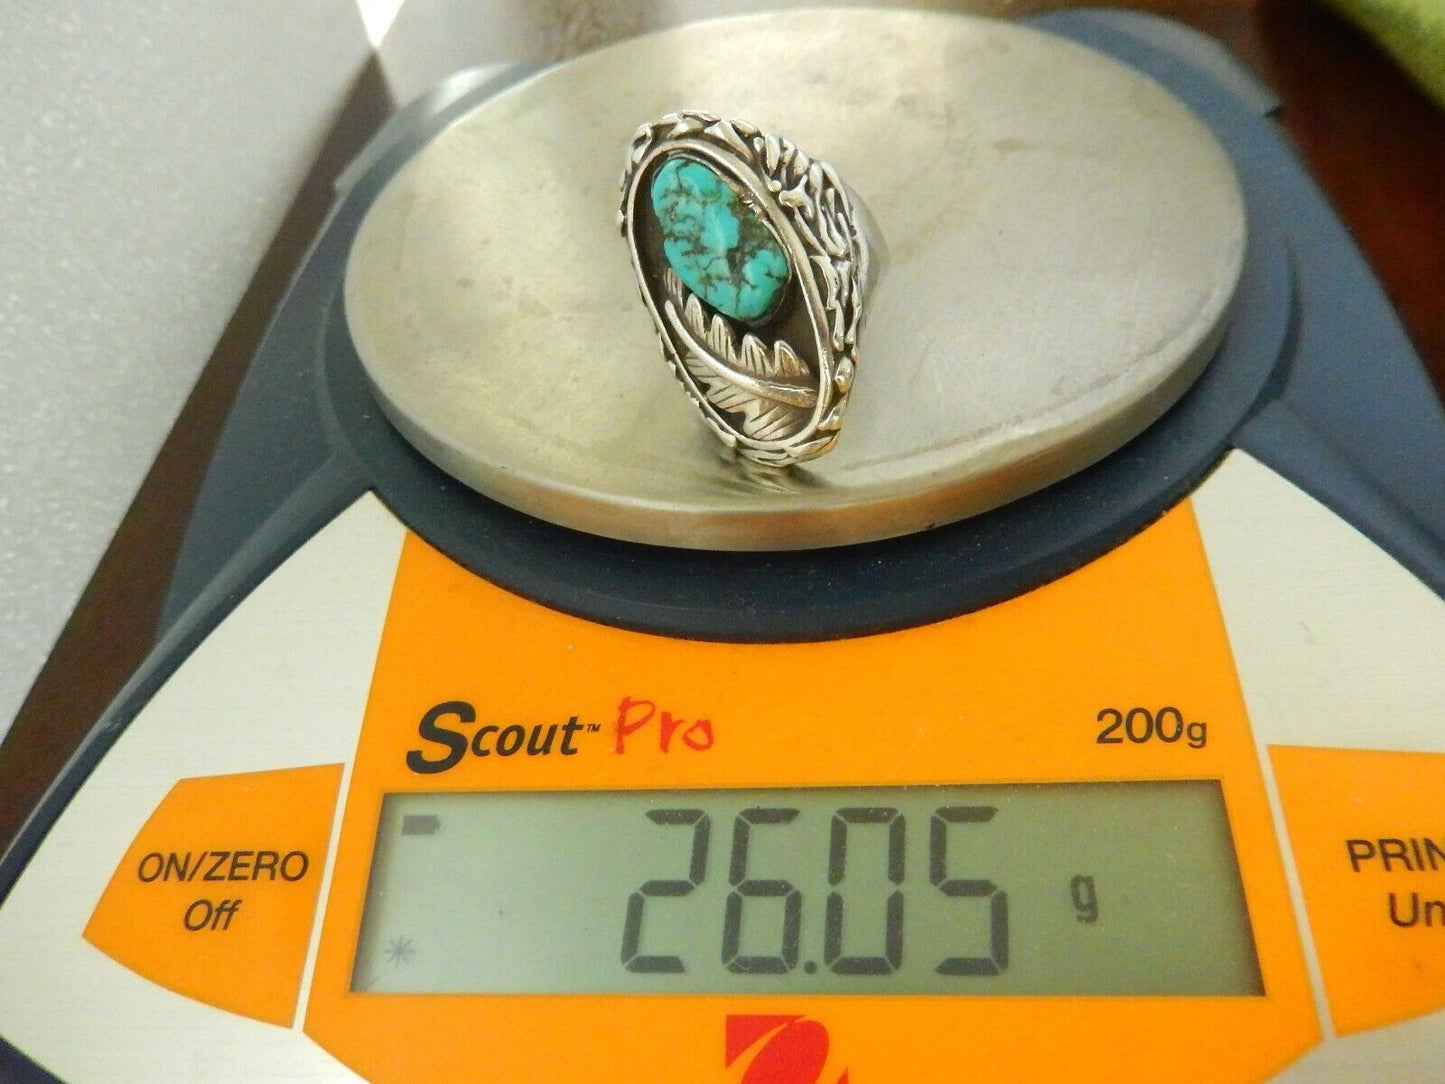 *VINTAGE* Large Heavy 26gm Native Amer. Sterling Silver Turquoise Ring Size 10.5